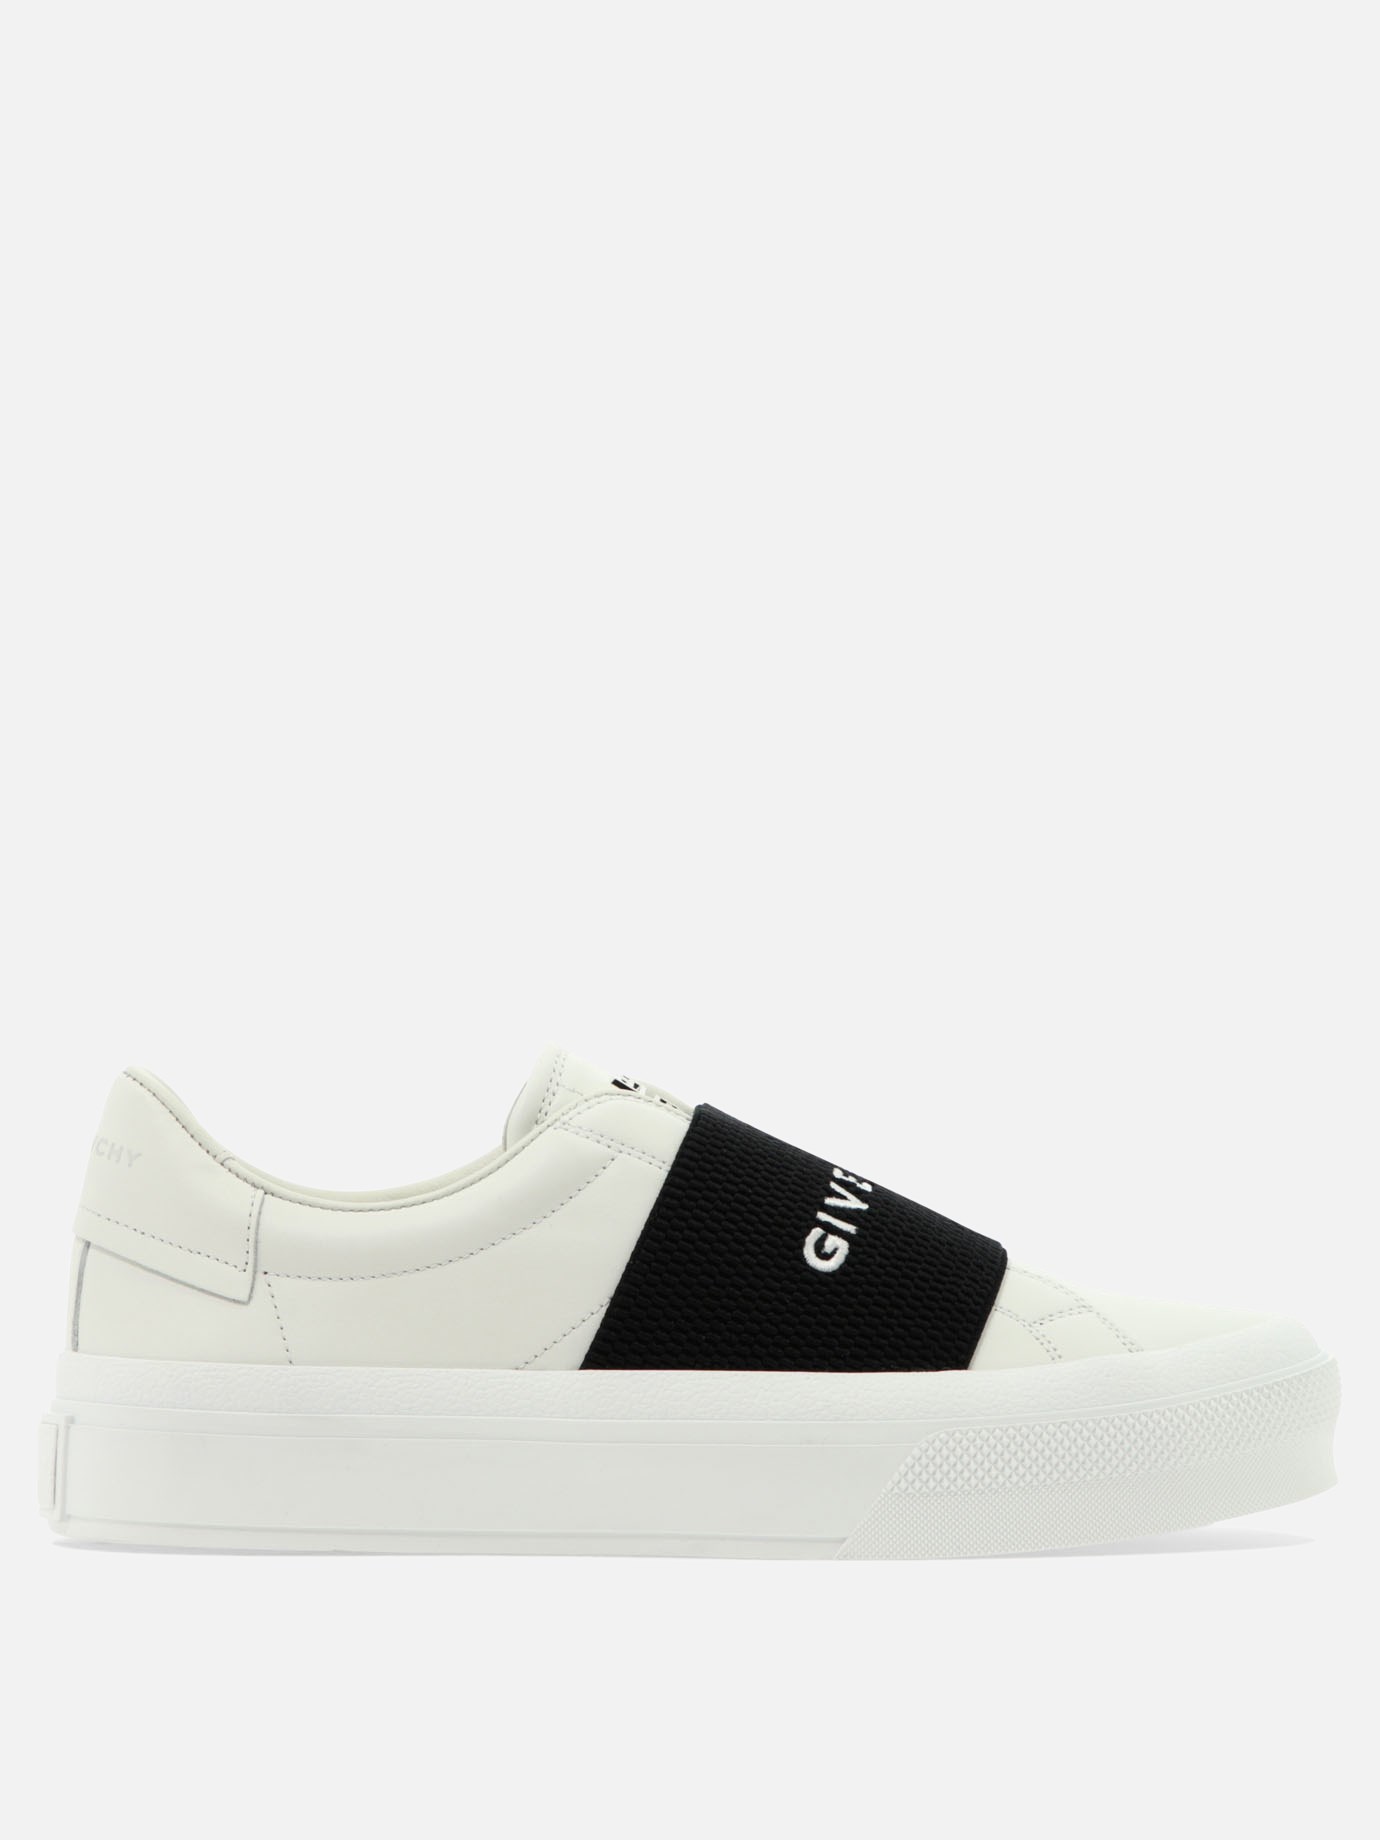  City Sport  sneakersby Givenchy - 4